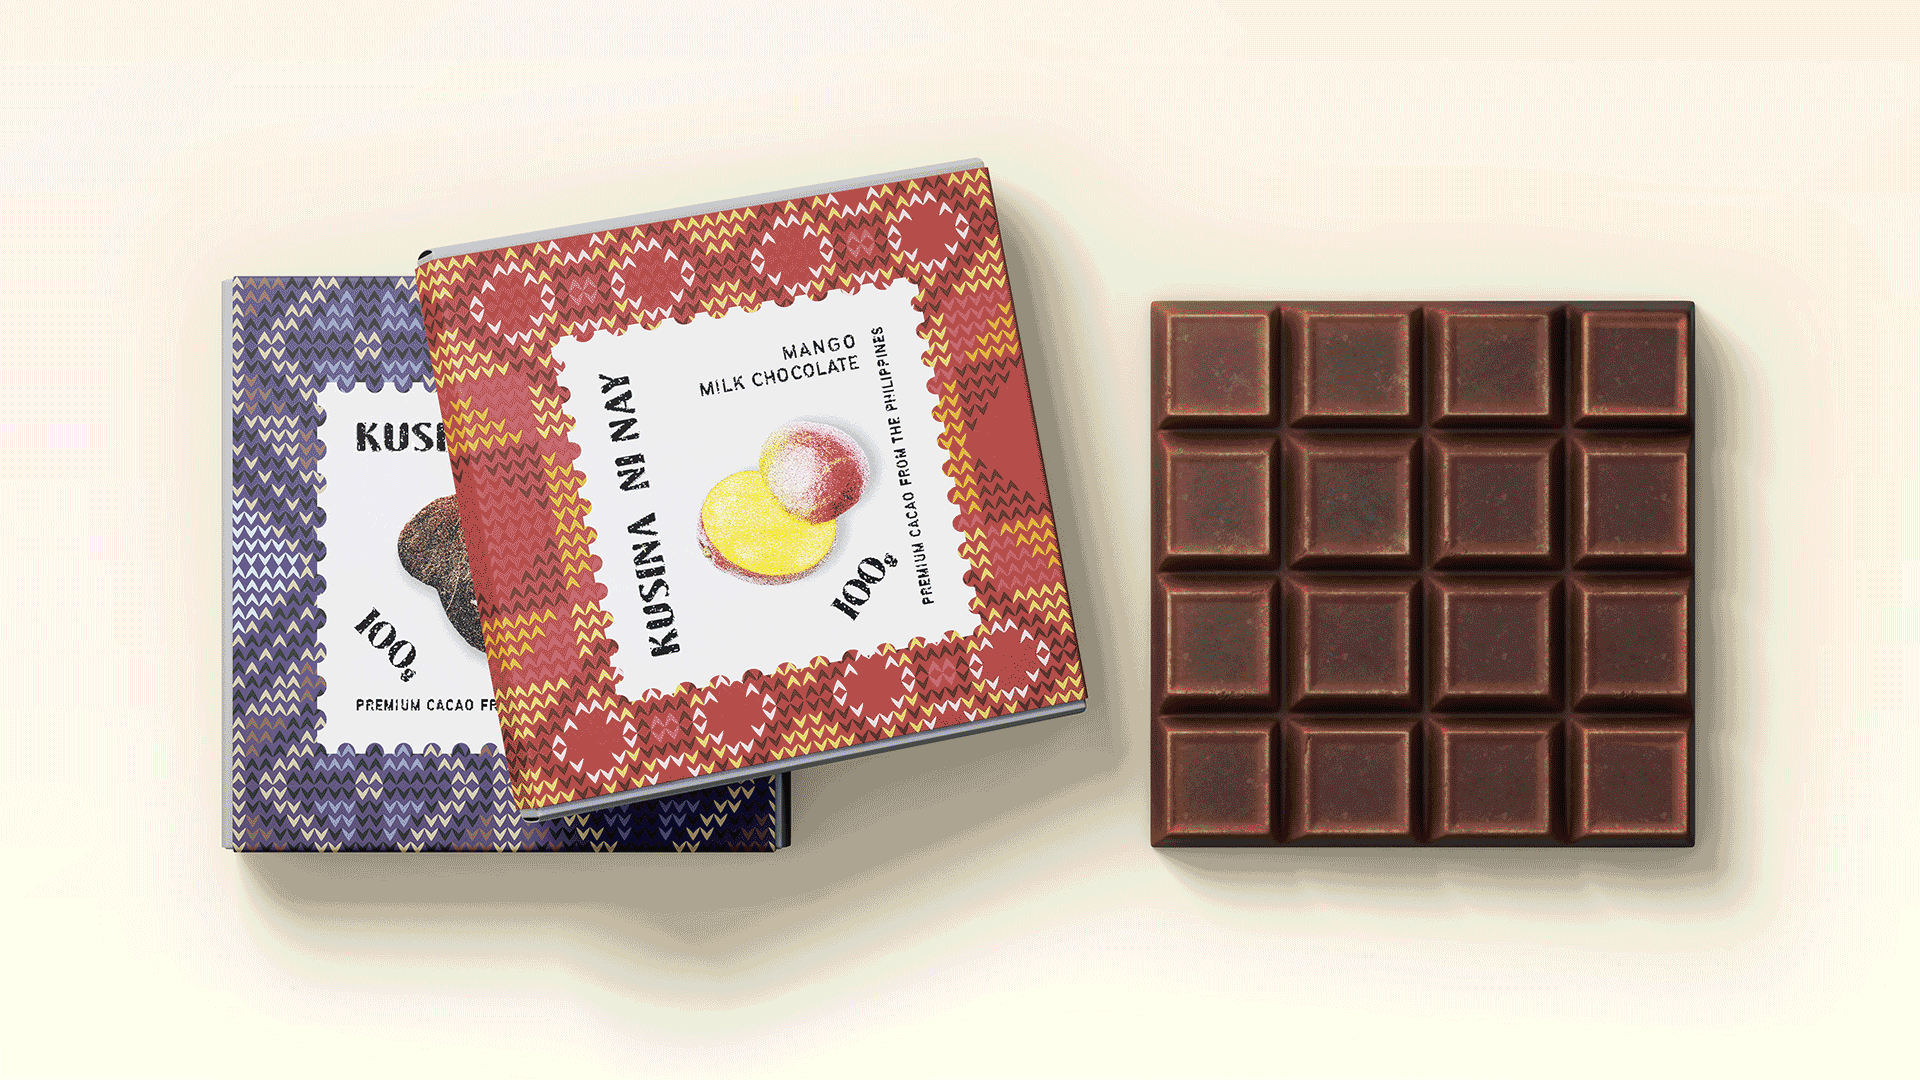 Two chocolate bars in patterned packaging next to a single chocolate bar.